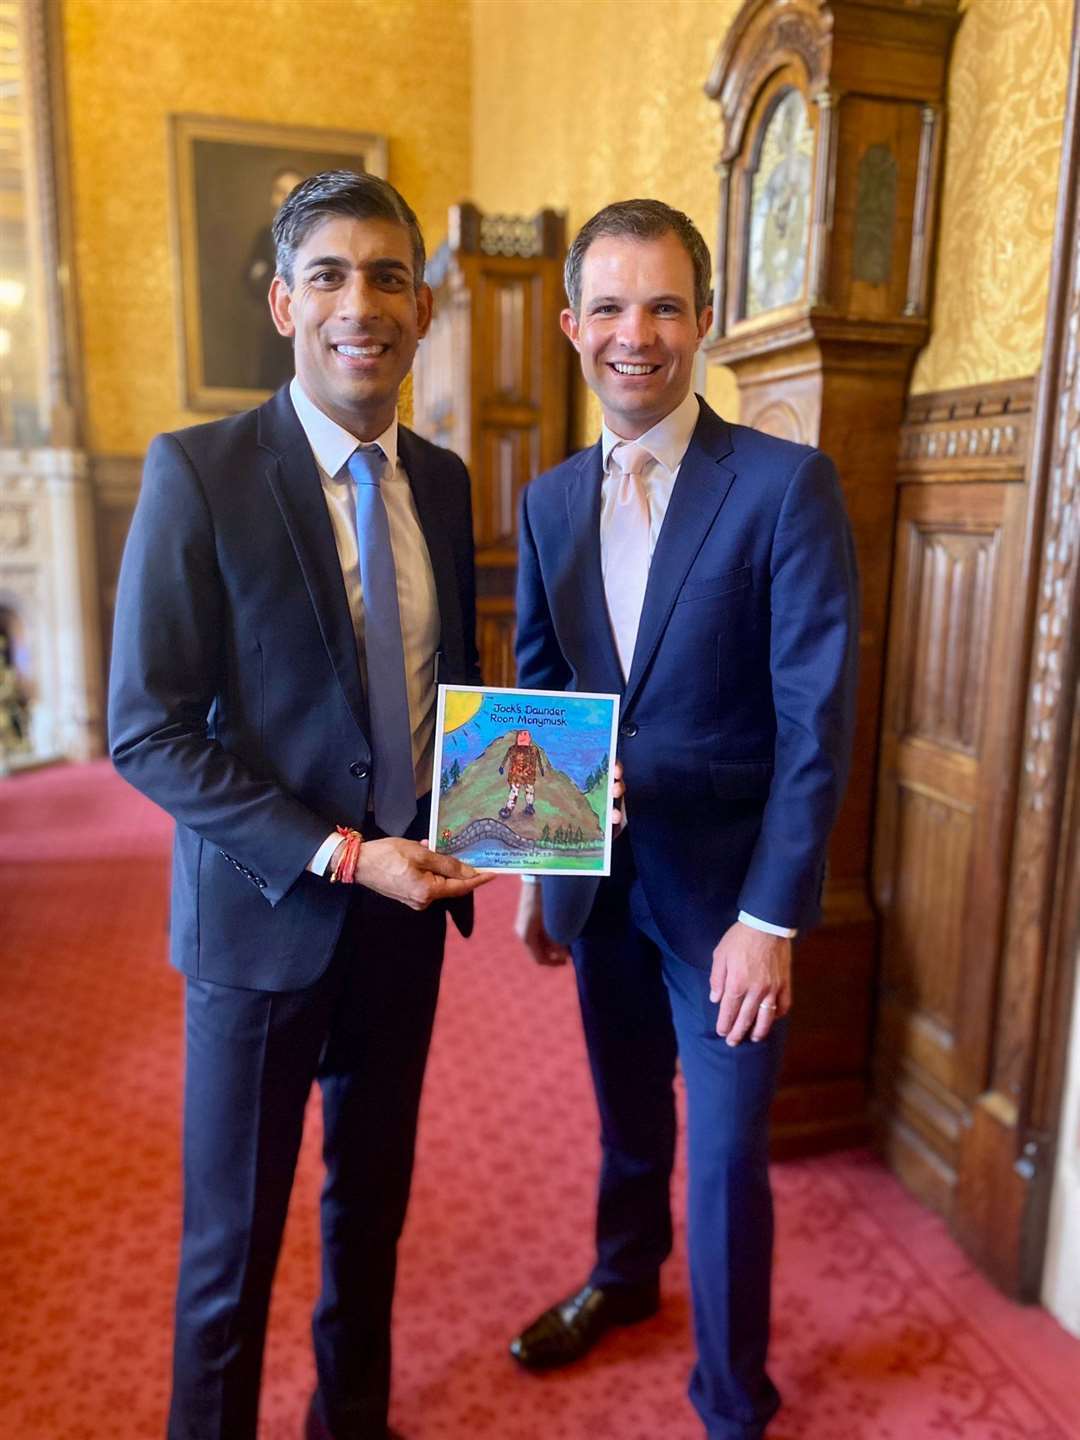 Prime Minister Rishi Sunak was presented with the book by MP Andrew Bowie